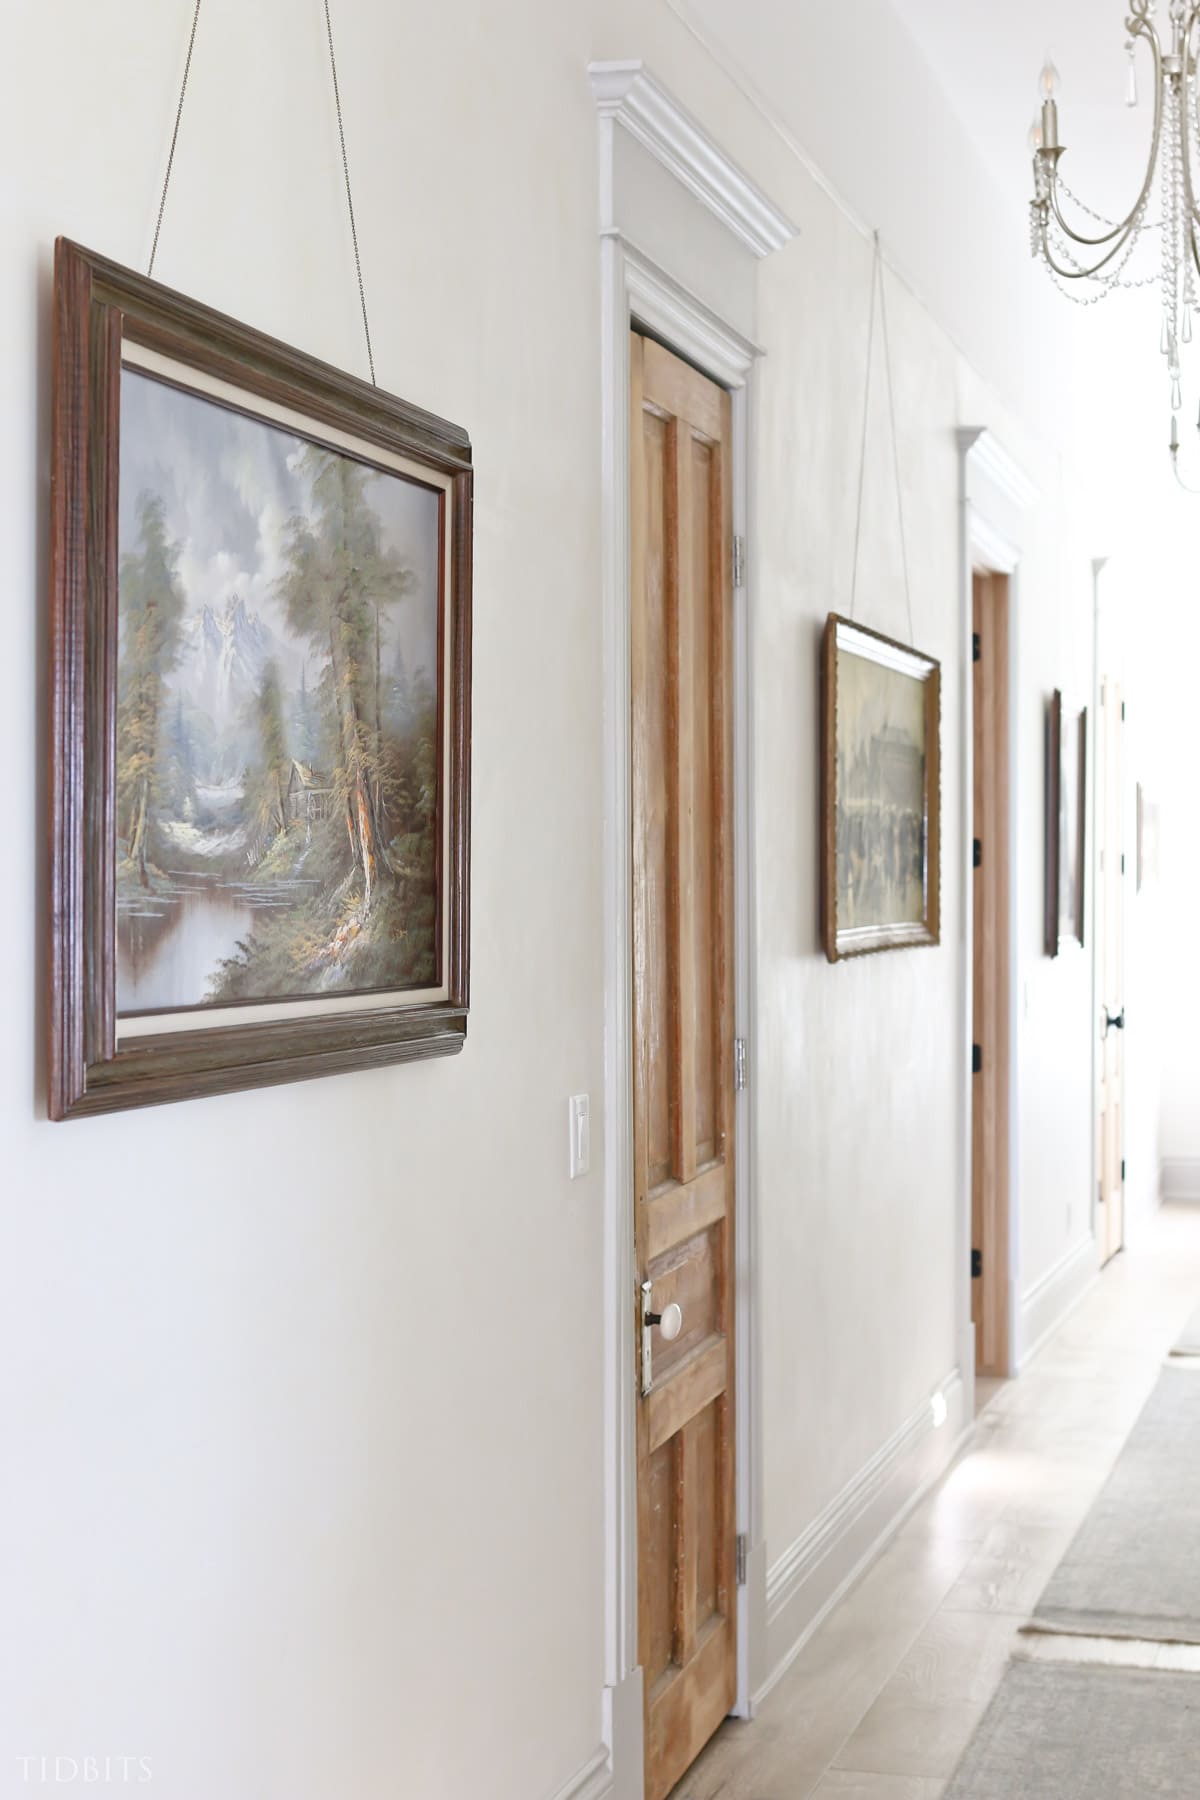 Hallway with large wall art hung on the walls